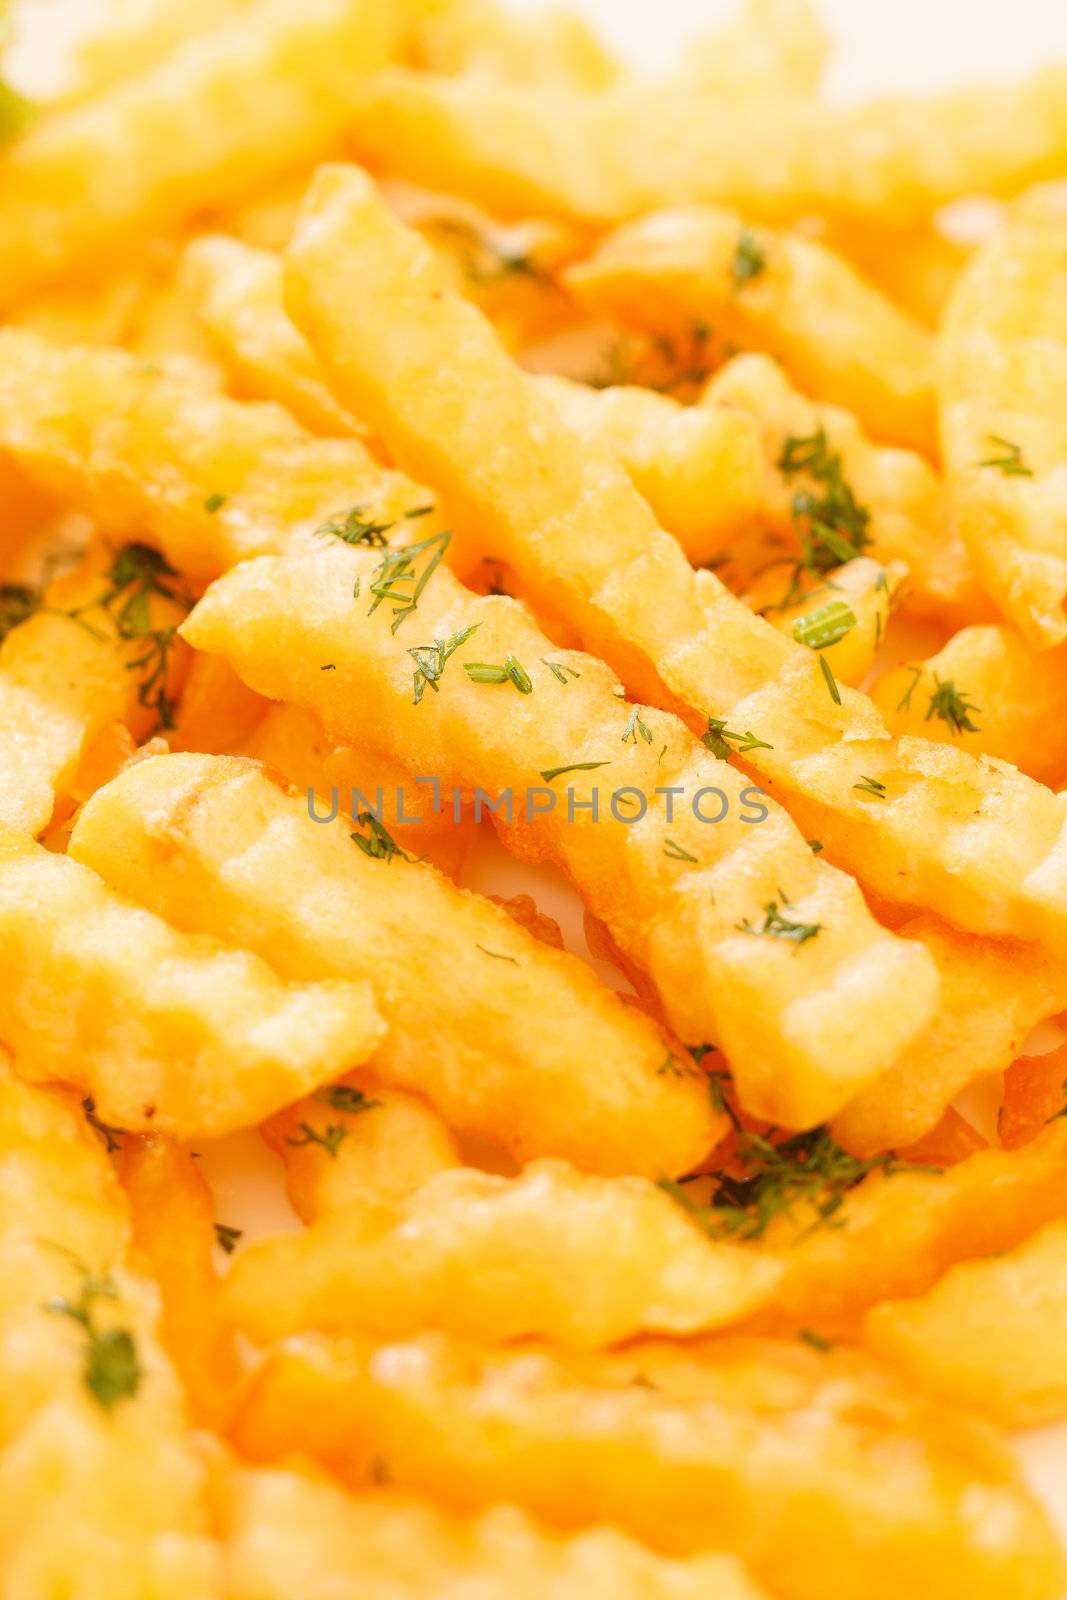 Golden French fries potatoes by shebeko